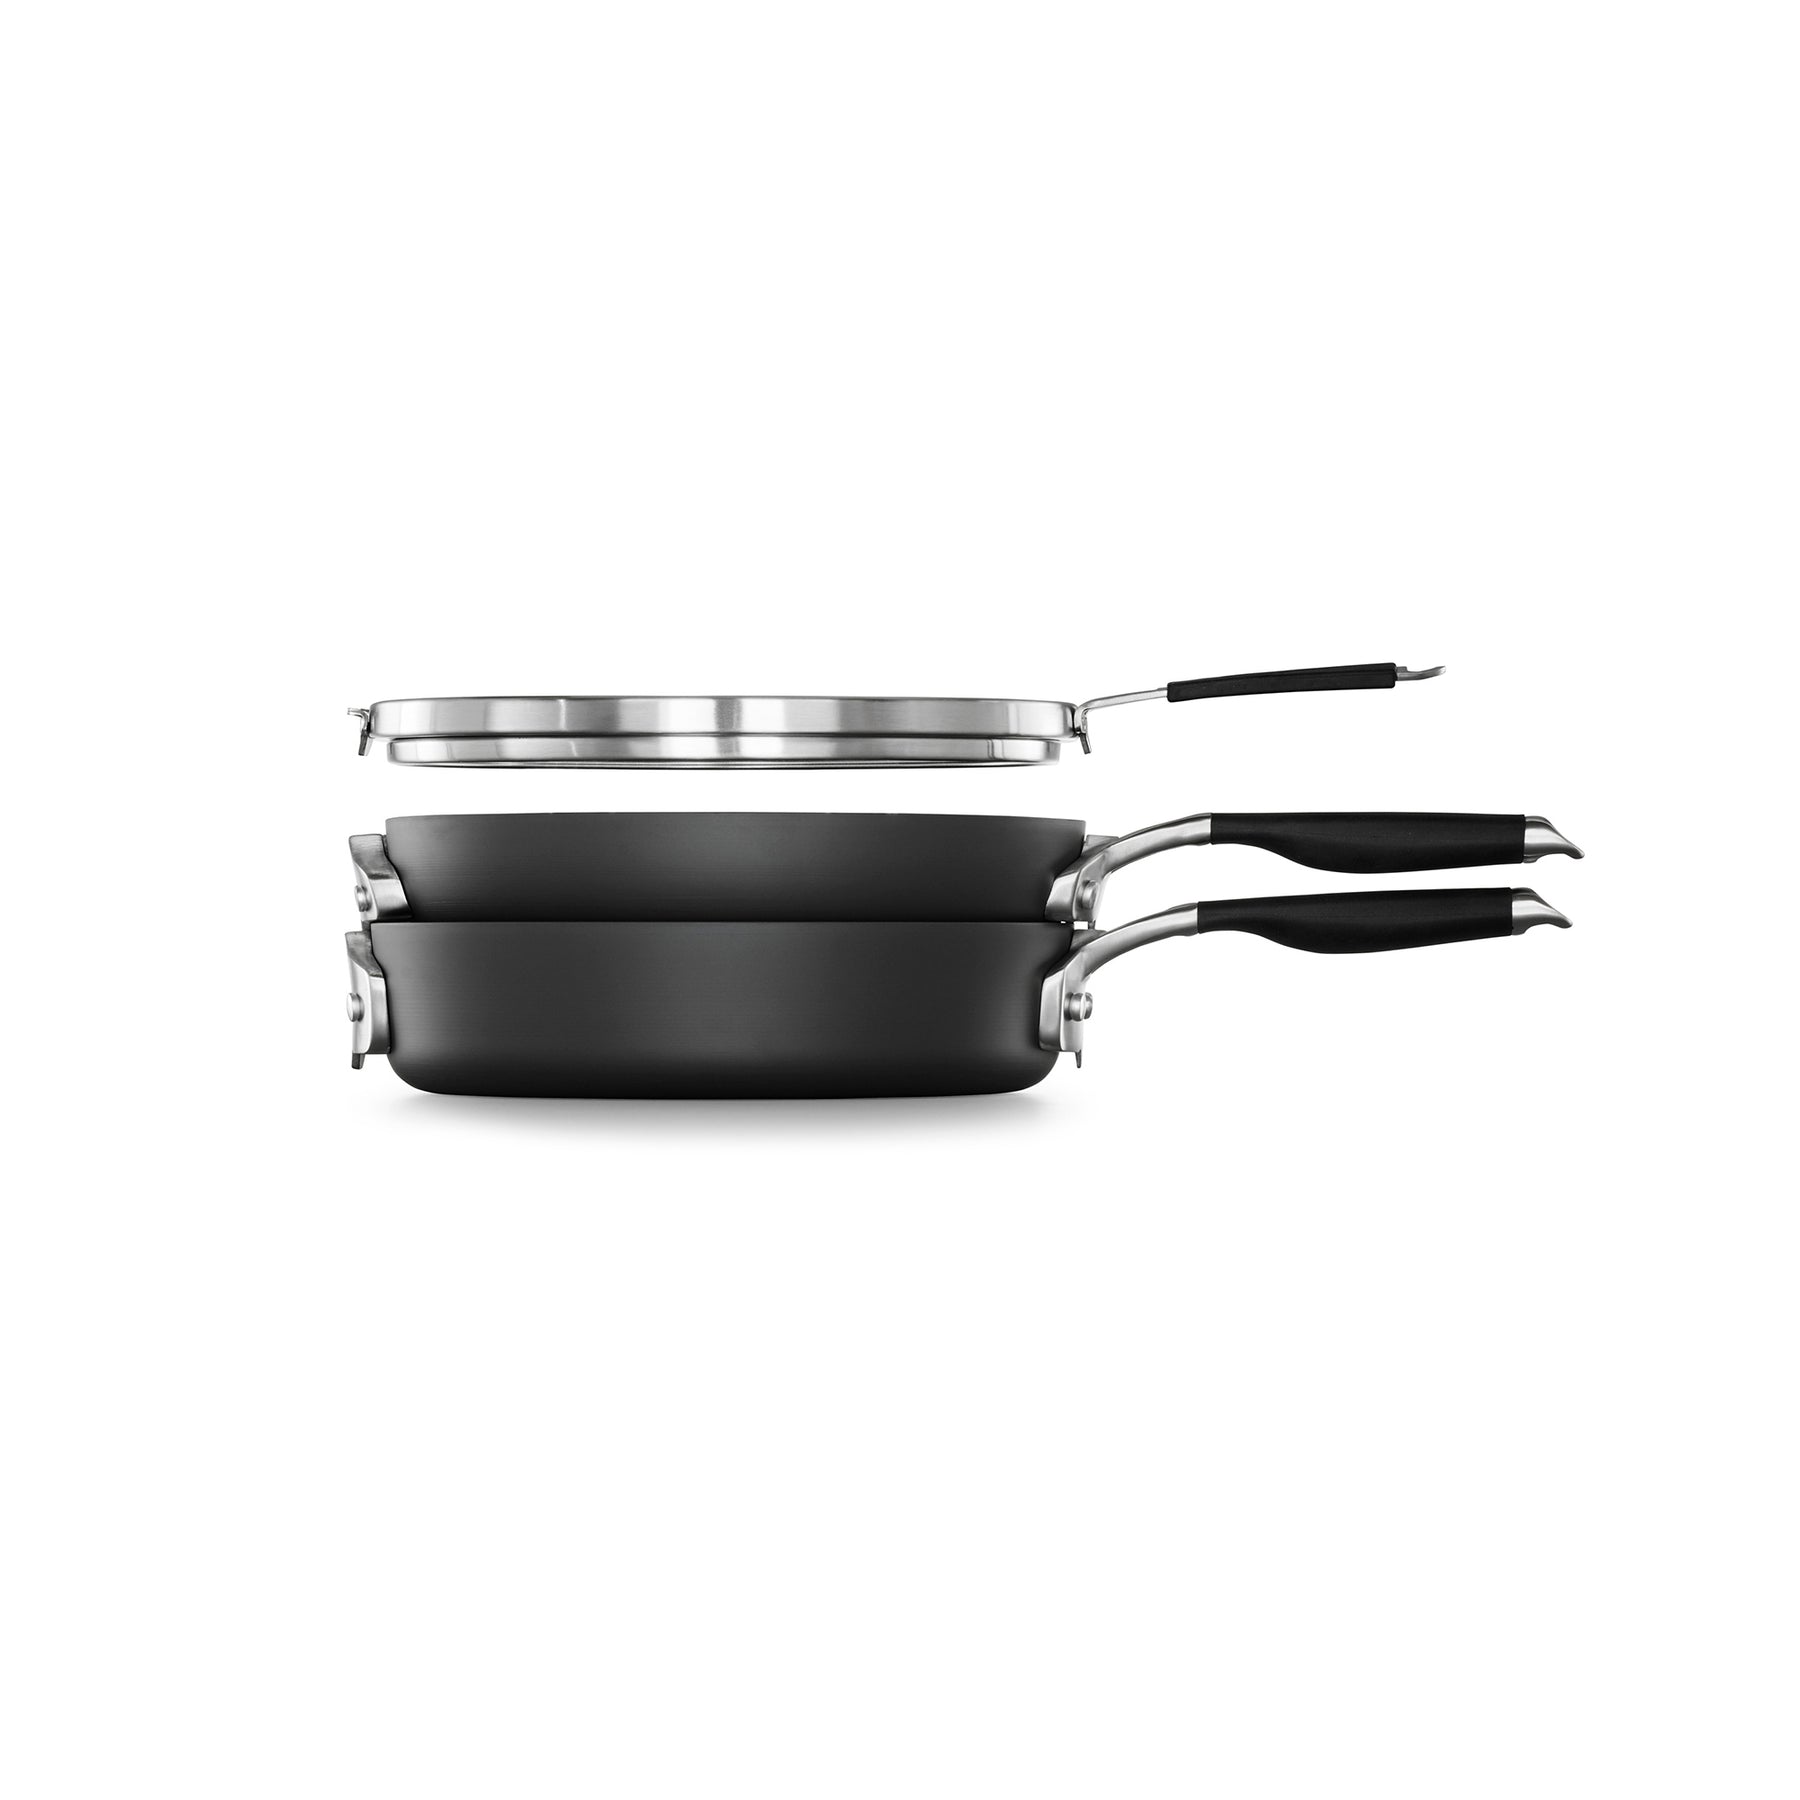 Calphalon Select 3pc Space Saving Hard-Anodized Nonstick Cookware Set, 10 Inch Frying Pan and 3Qt Saute Pan with Flat Cover